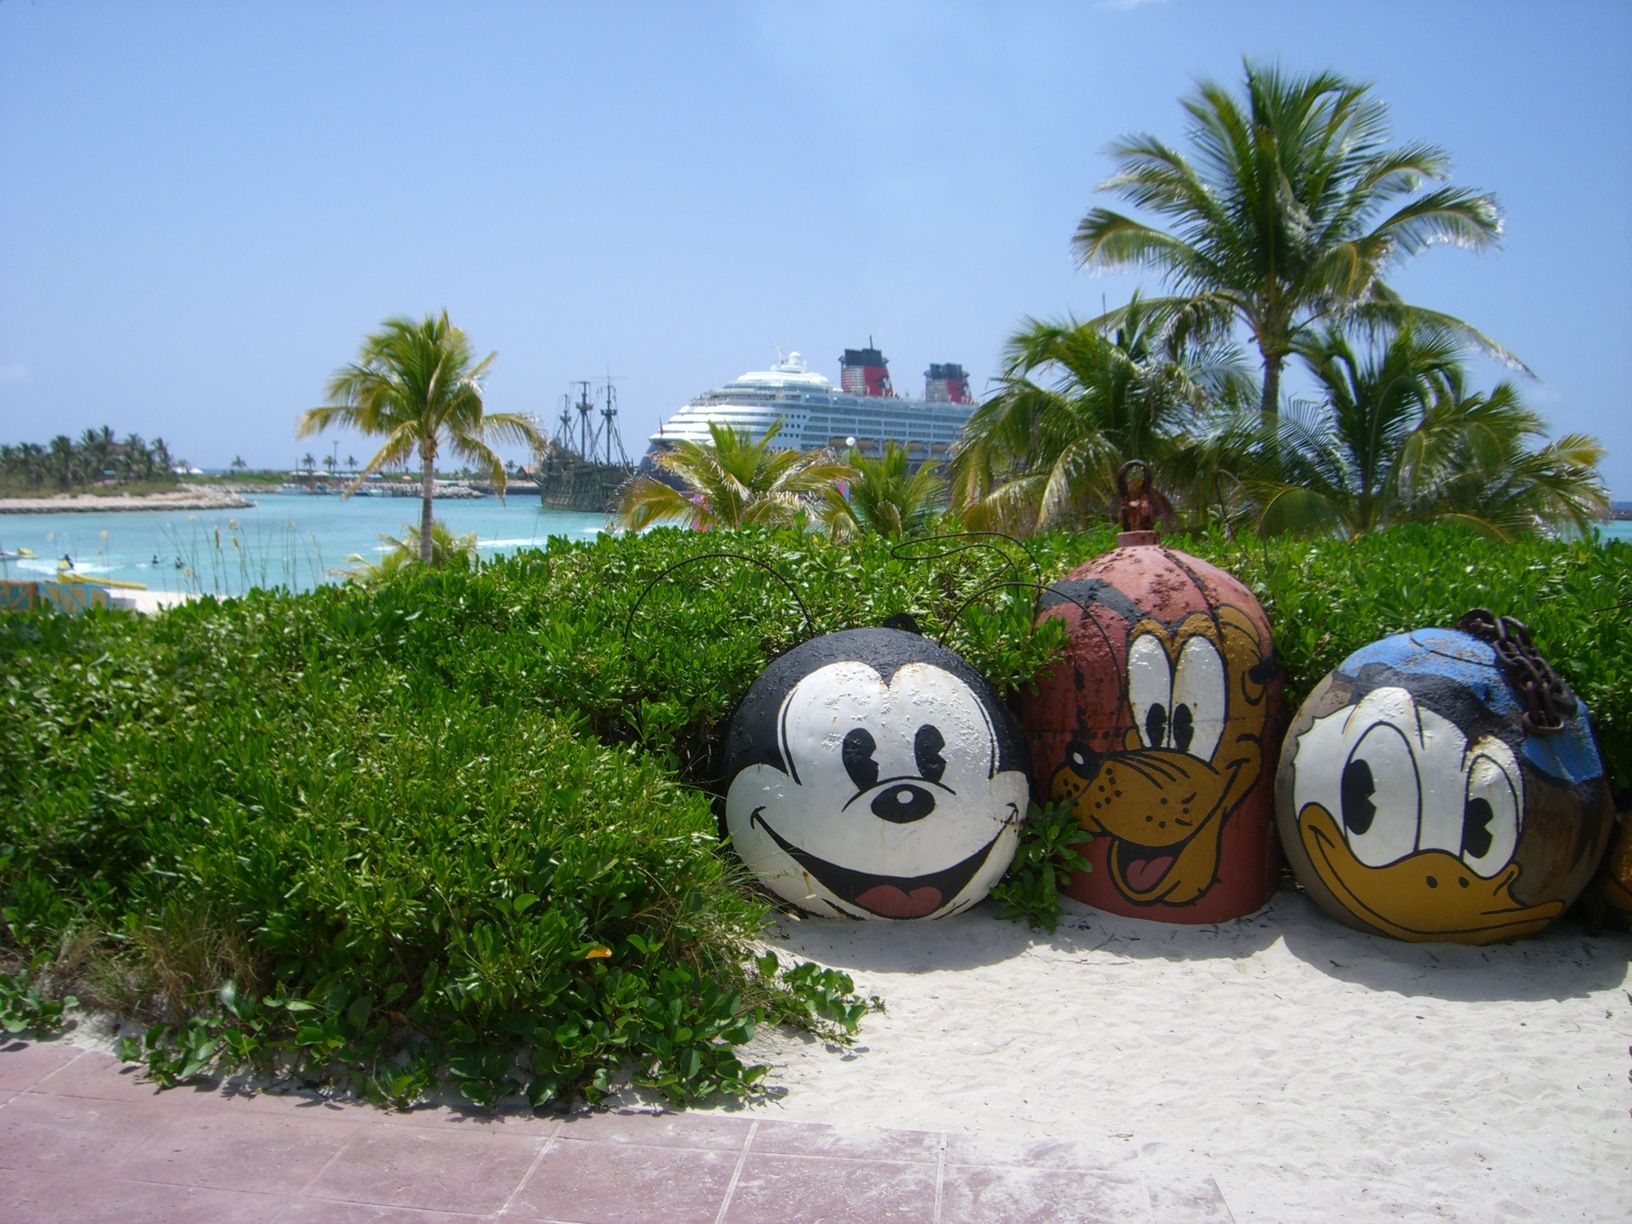 Is Disney Cruise Line buying a new island?